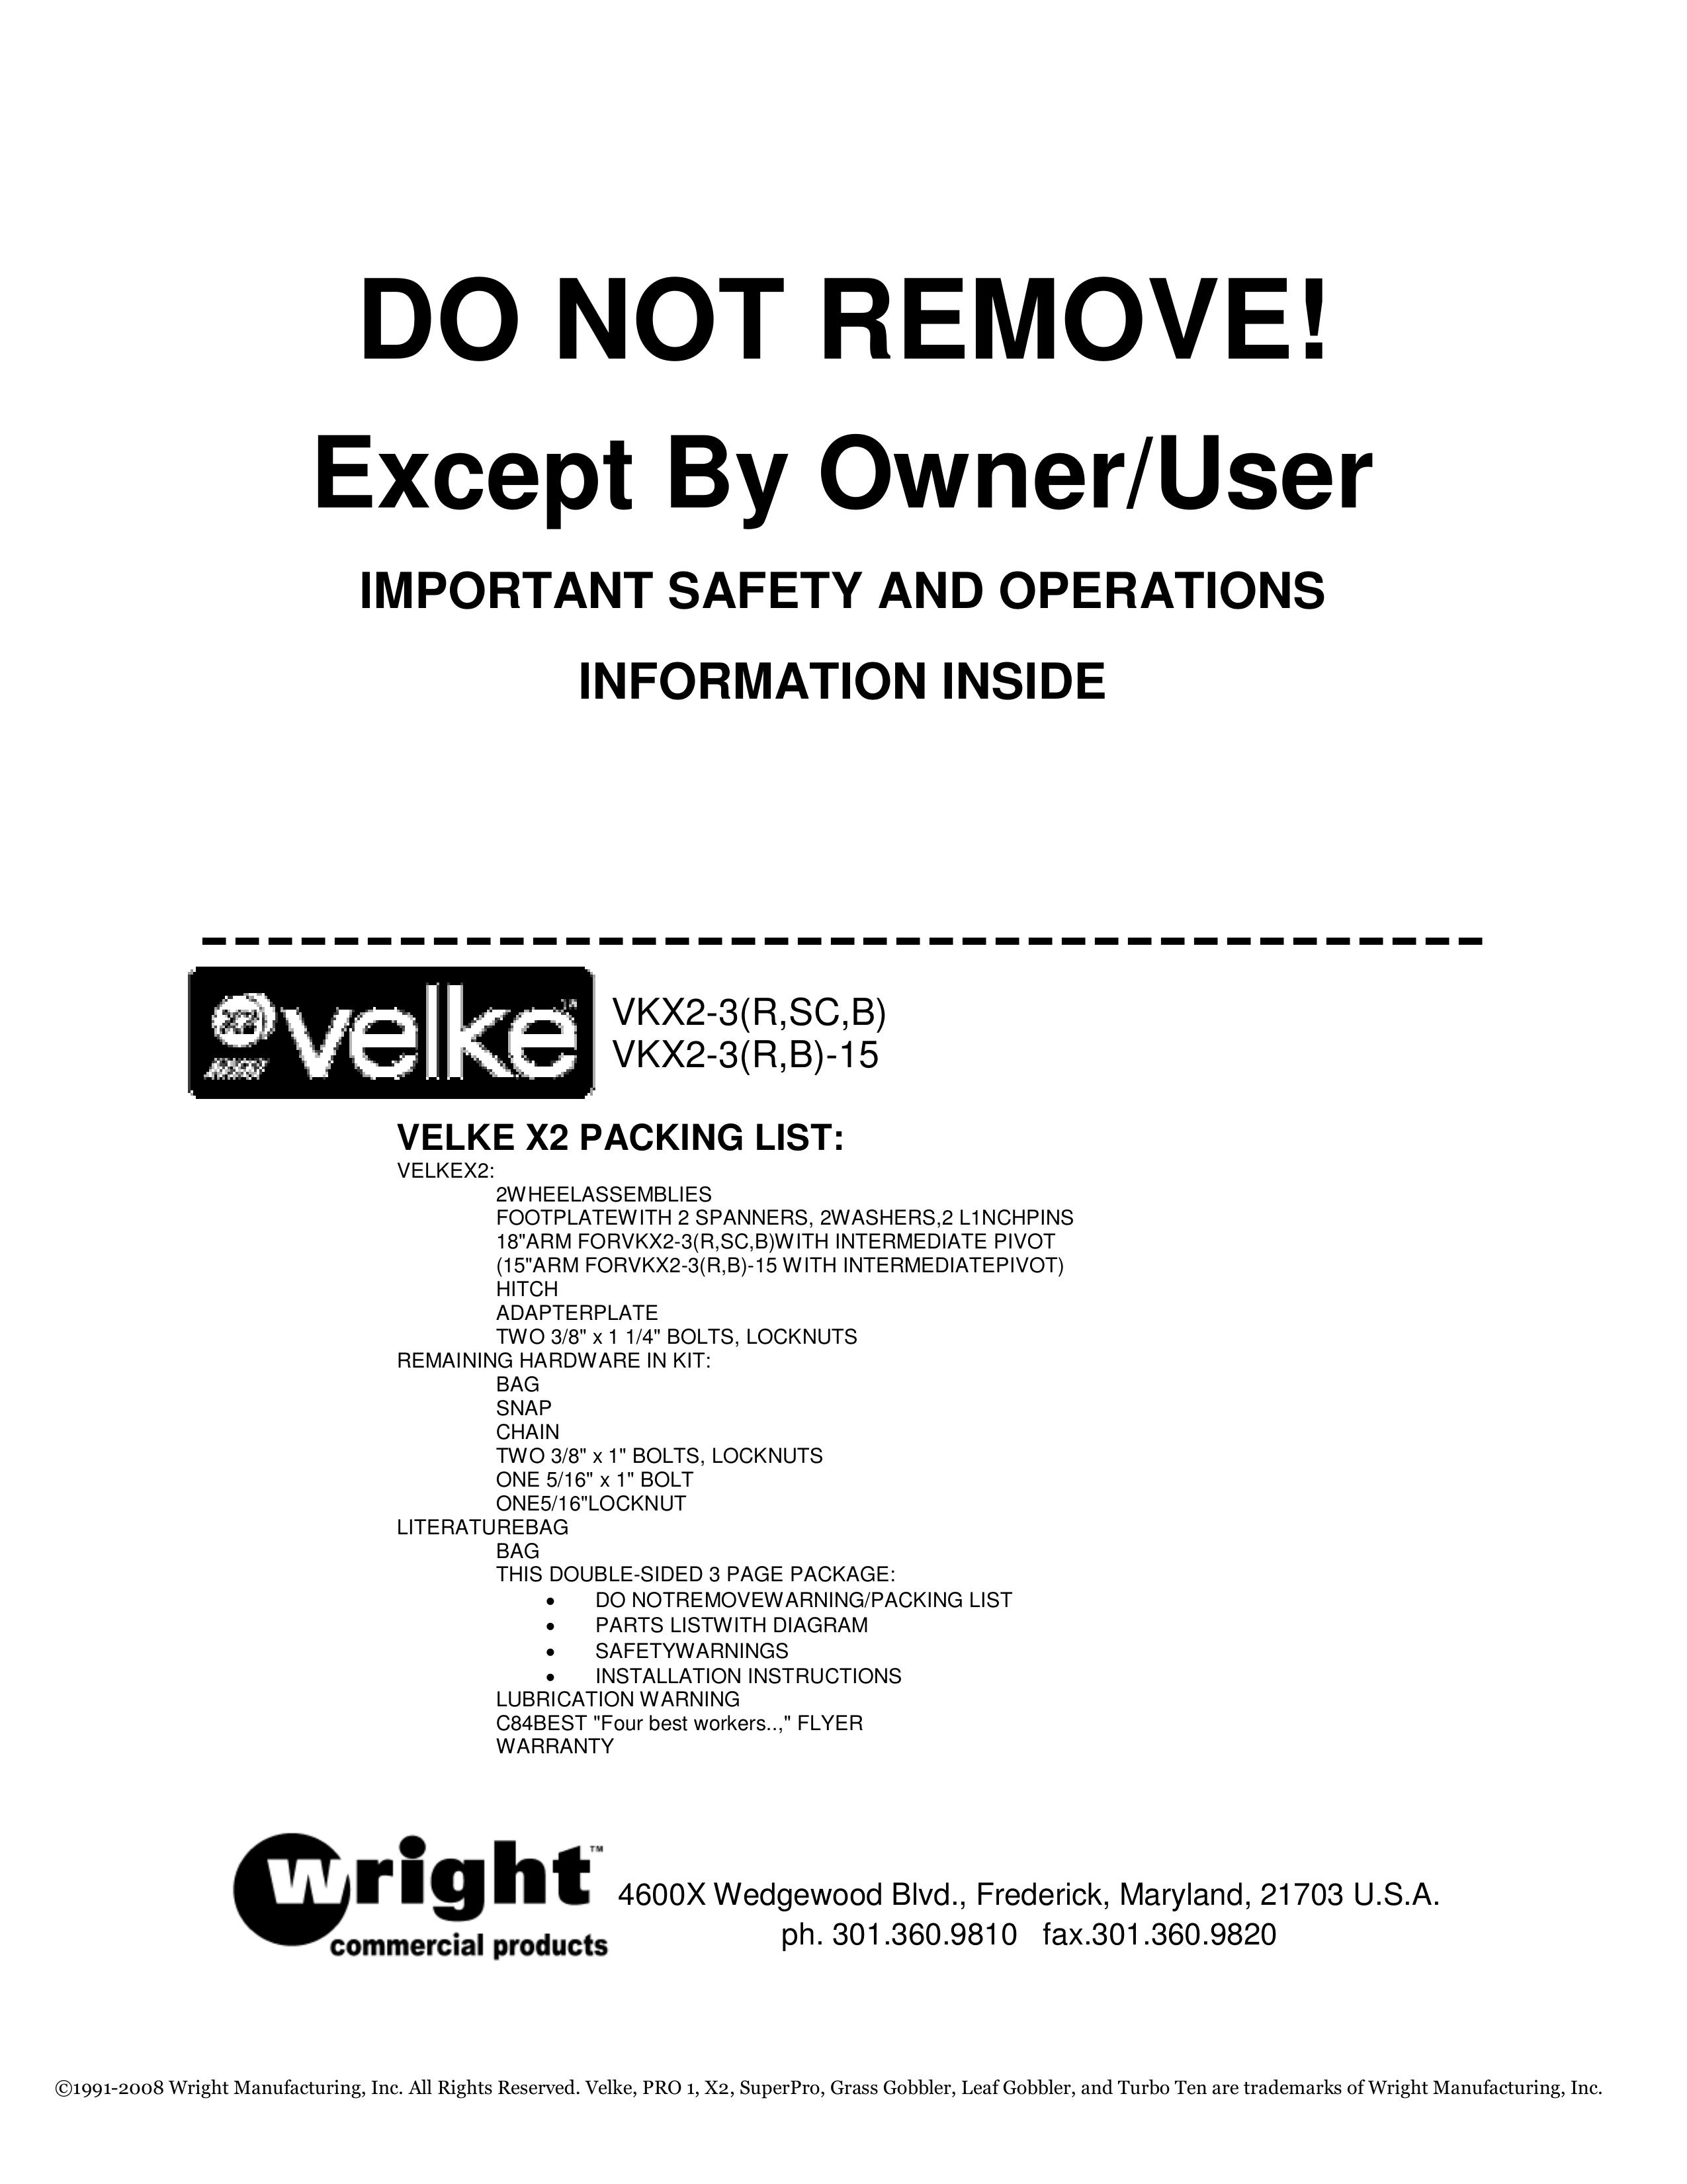 Wright Manufacturing VKX2-3(R Lawn Mower User Manual